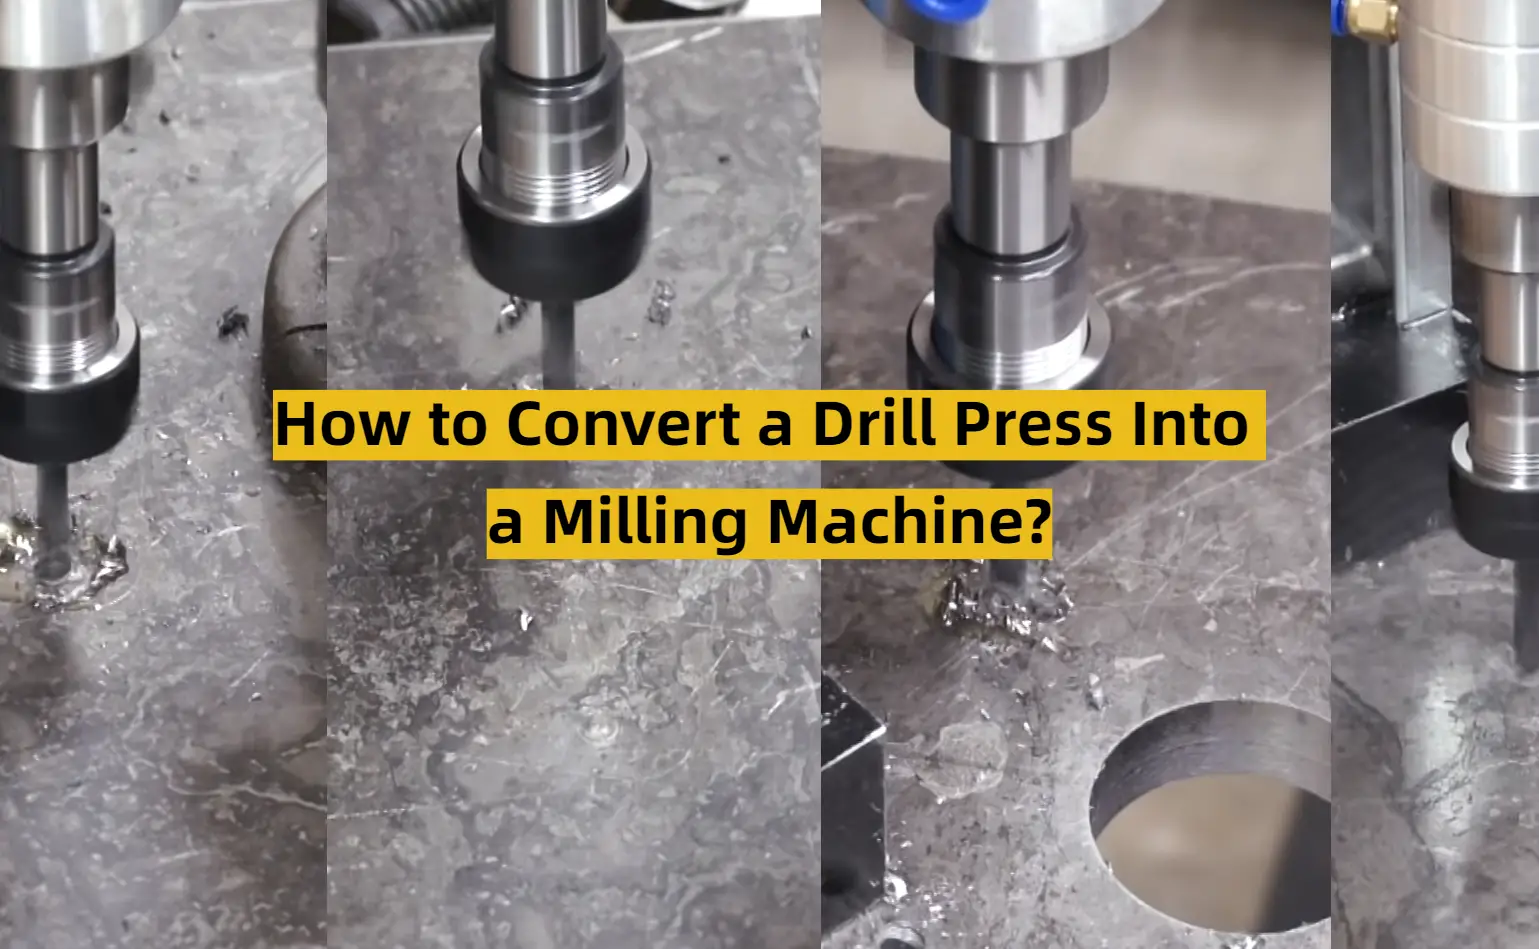 How to Convert a Drill Press Into a Milling Machine?